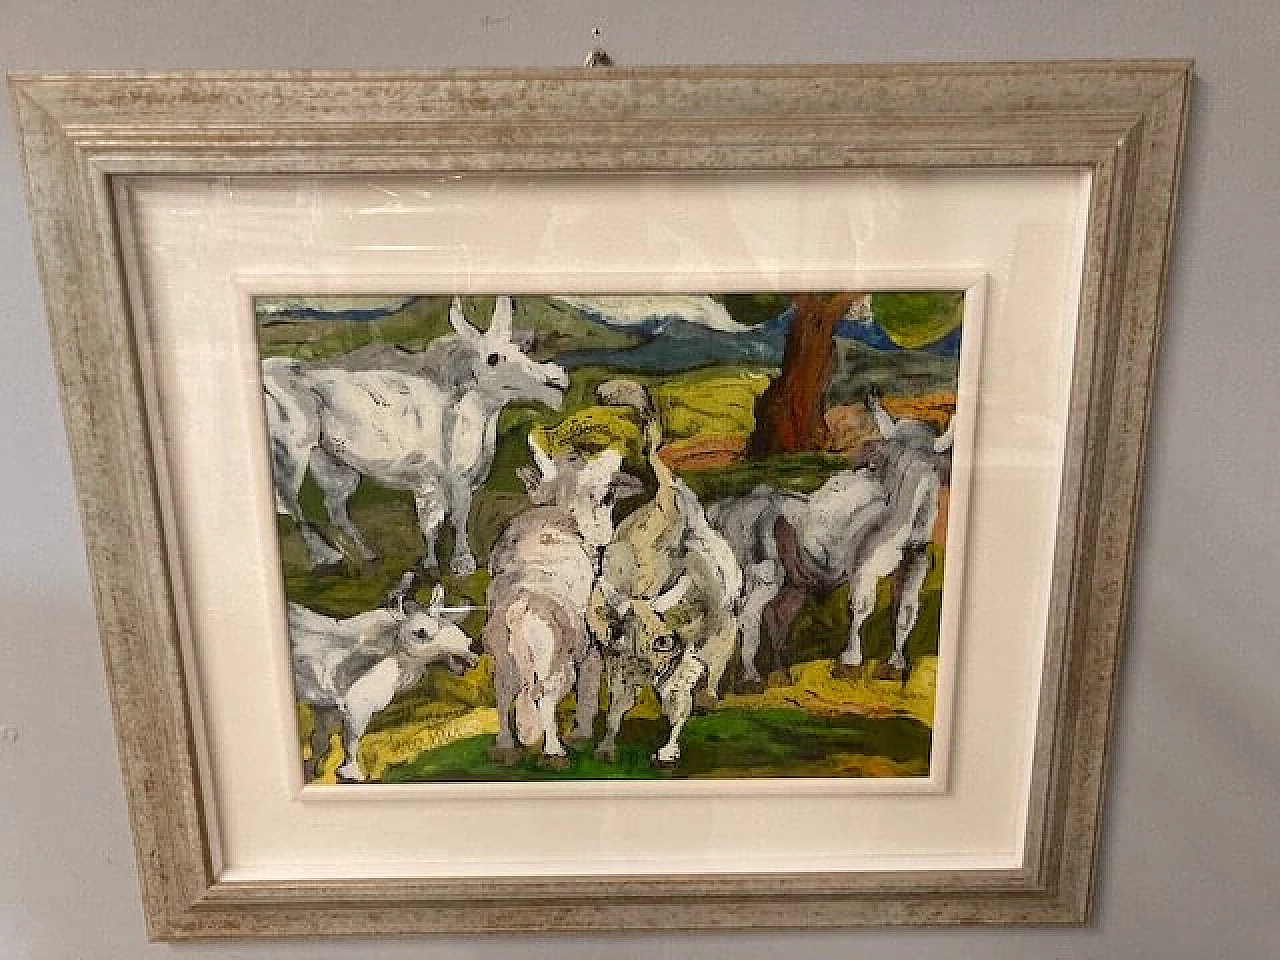 Giuseppe Serafini, Cows and horses in the pasture, oil on hardboard, 2000s 8